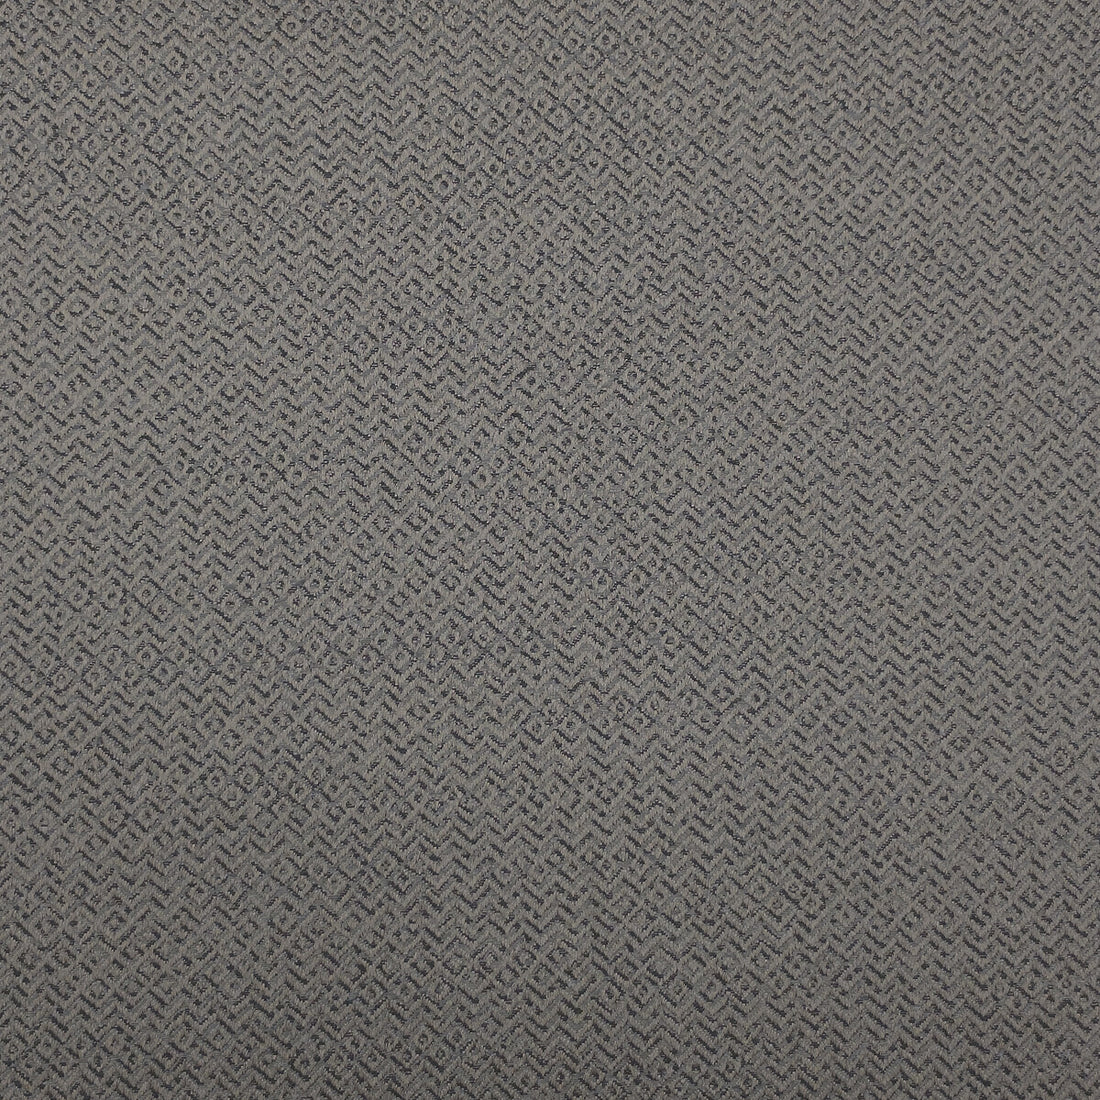 Kf Des fabric - pattern LZ-30203.09.0 - by Kravet Design in the Lizzo collection